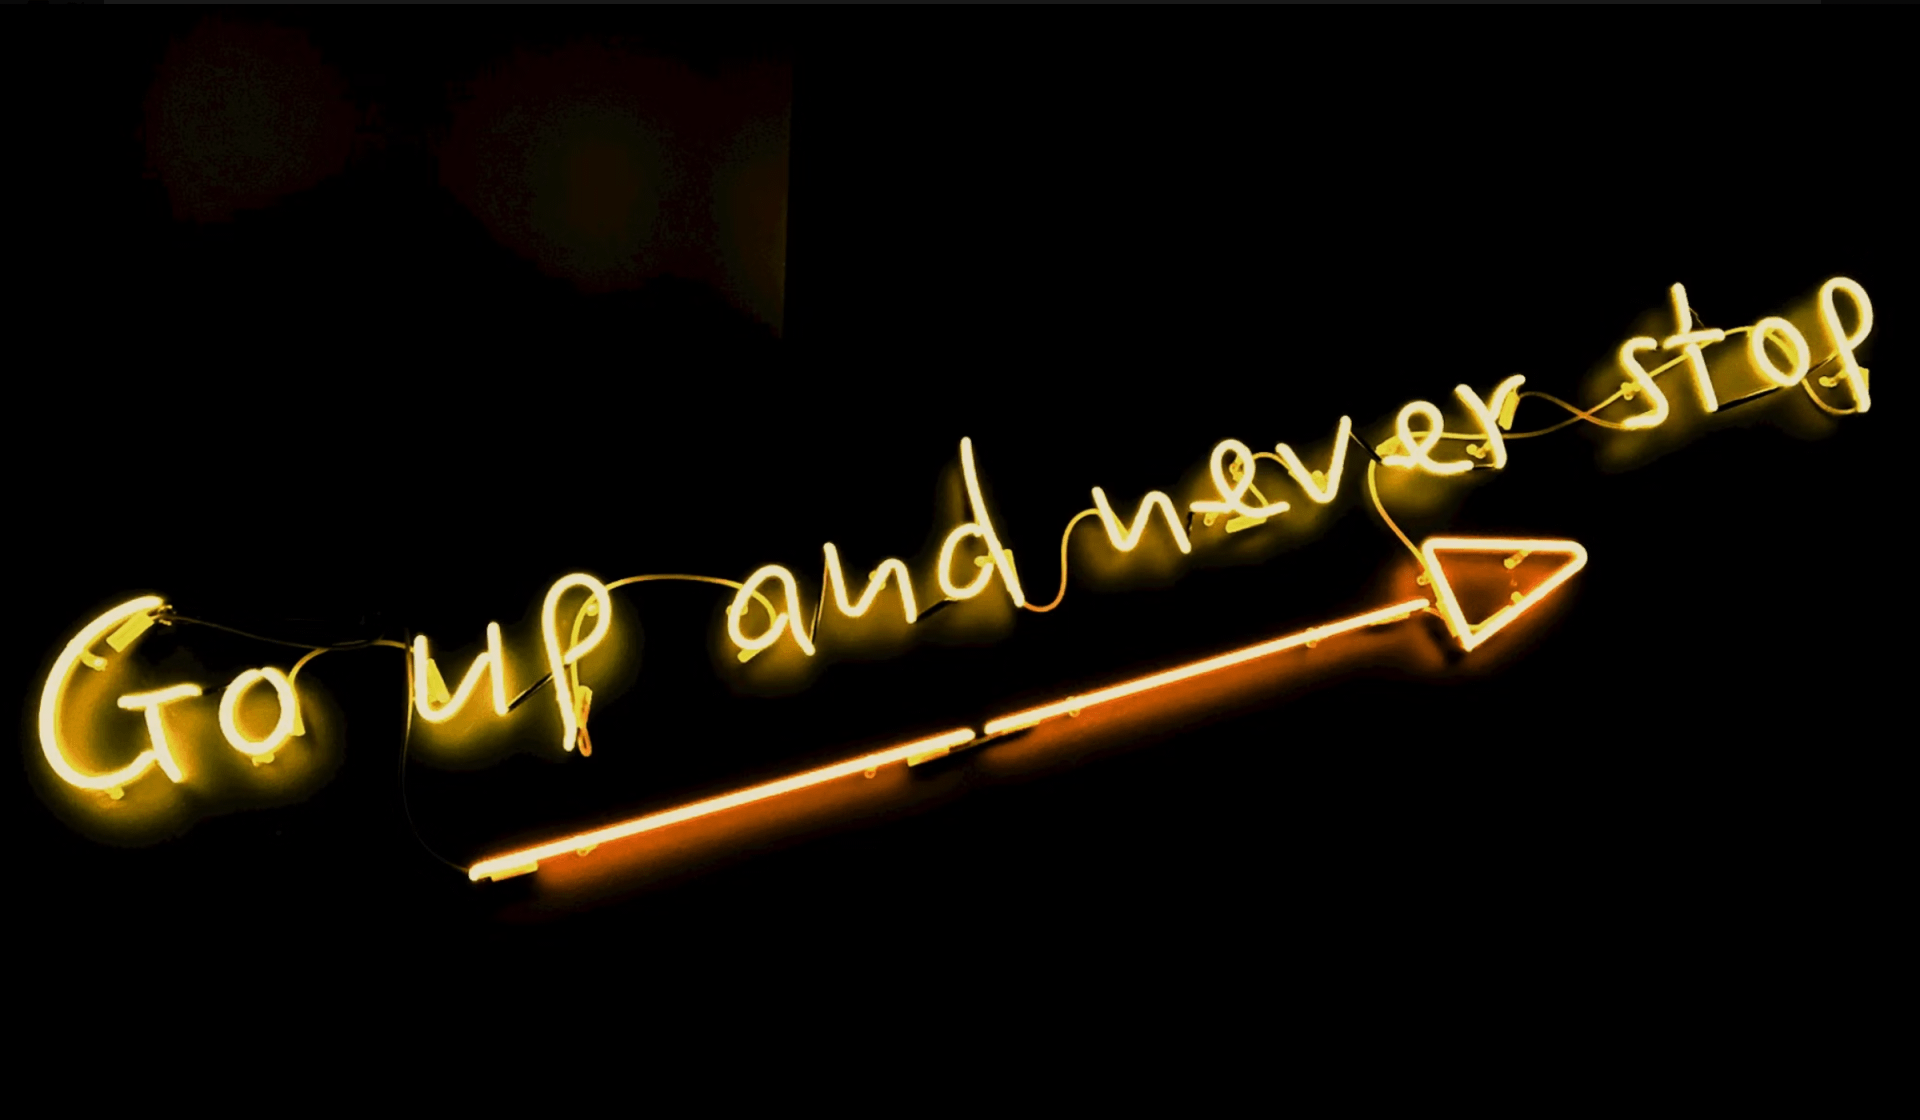 yellow neon sign on black background saying go up and never stop